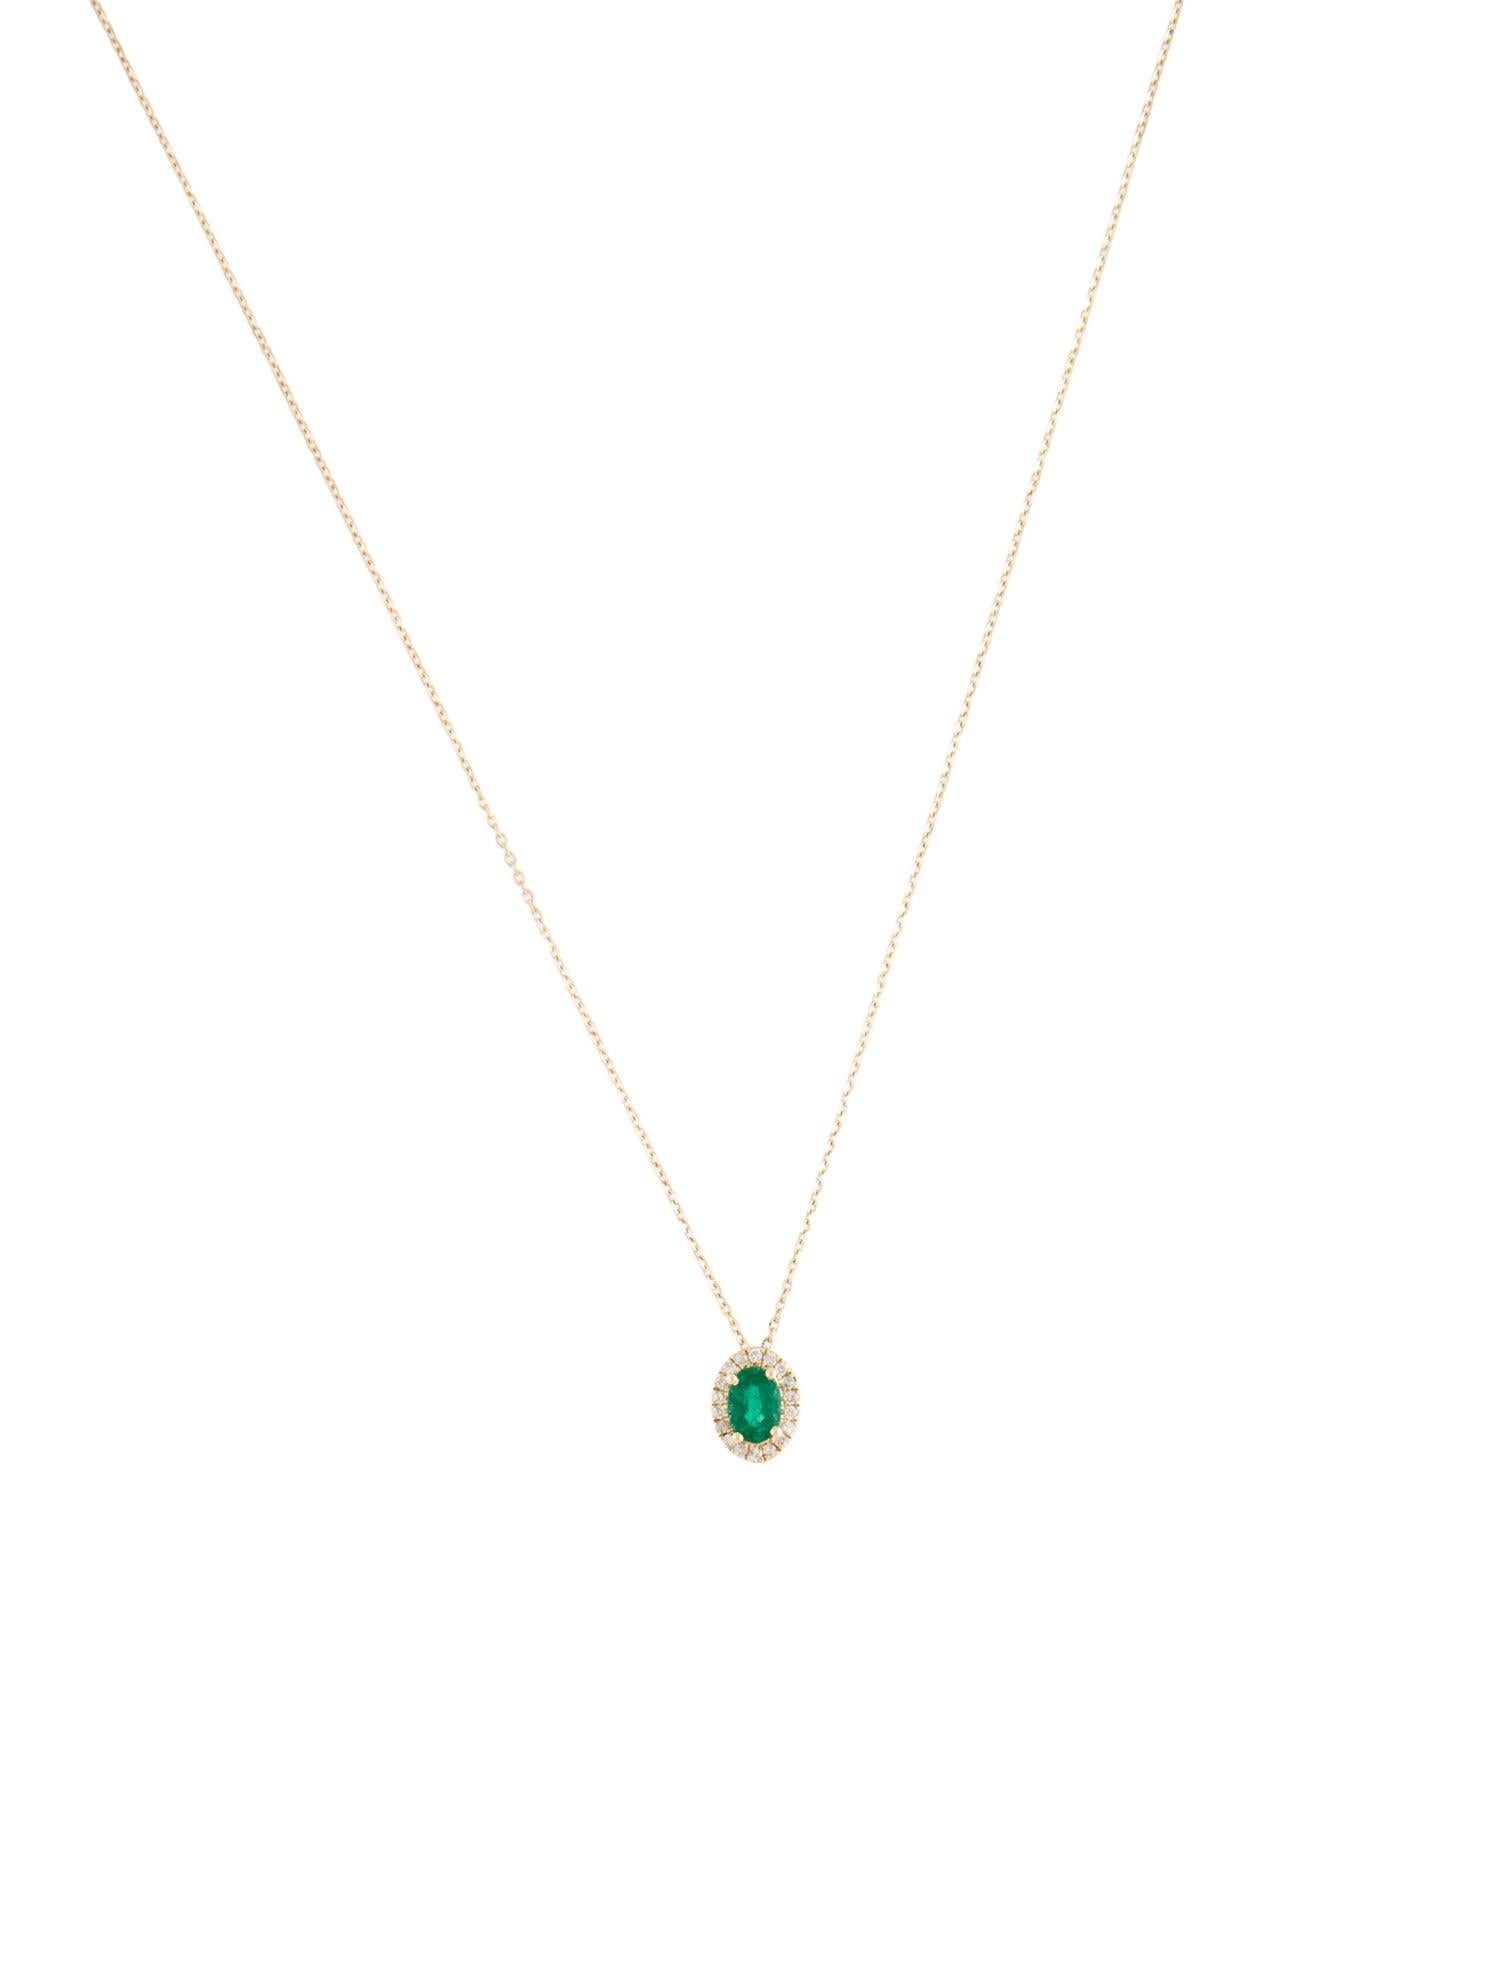 14K Emerald & Diamond Pendant Necklace - Elegant Gemstone Statement Piece In New Condition For Sale In Holtsville, NY